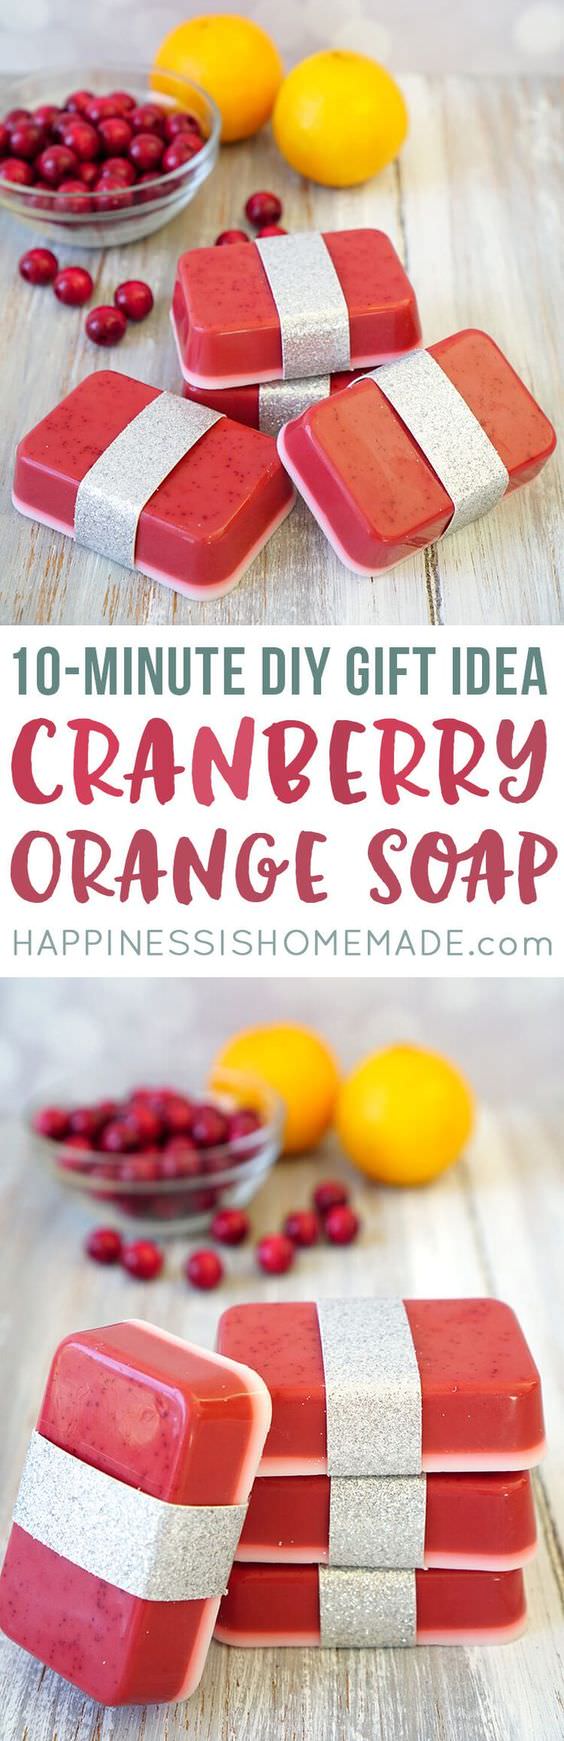 This Cranberry Orange Soap smells delicious, and you can whip up an entire batch in just a few minutes! Makes a great DIY homemade holiday gift idea!